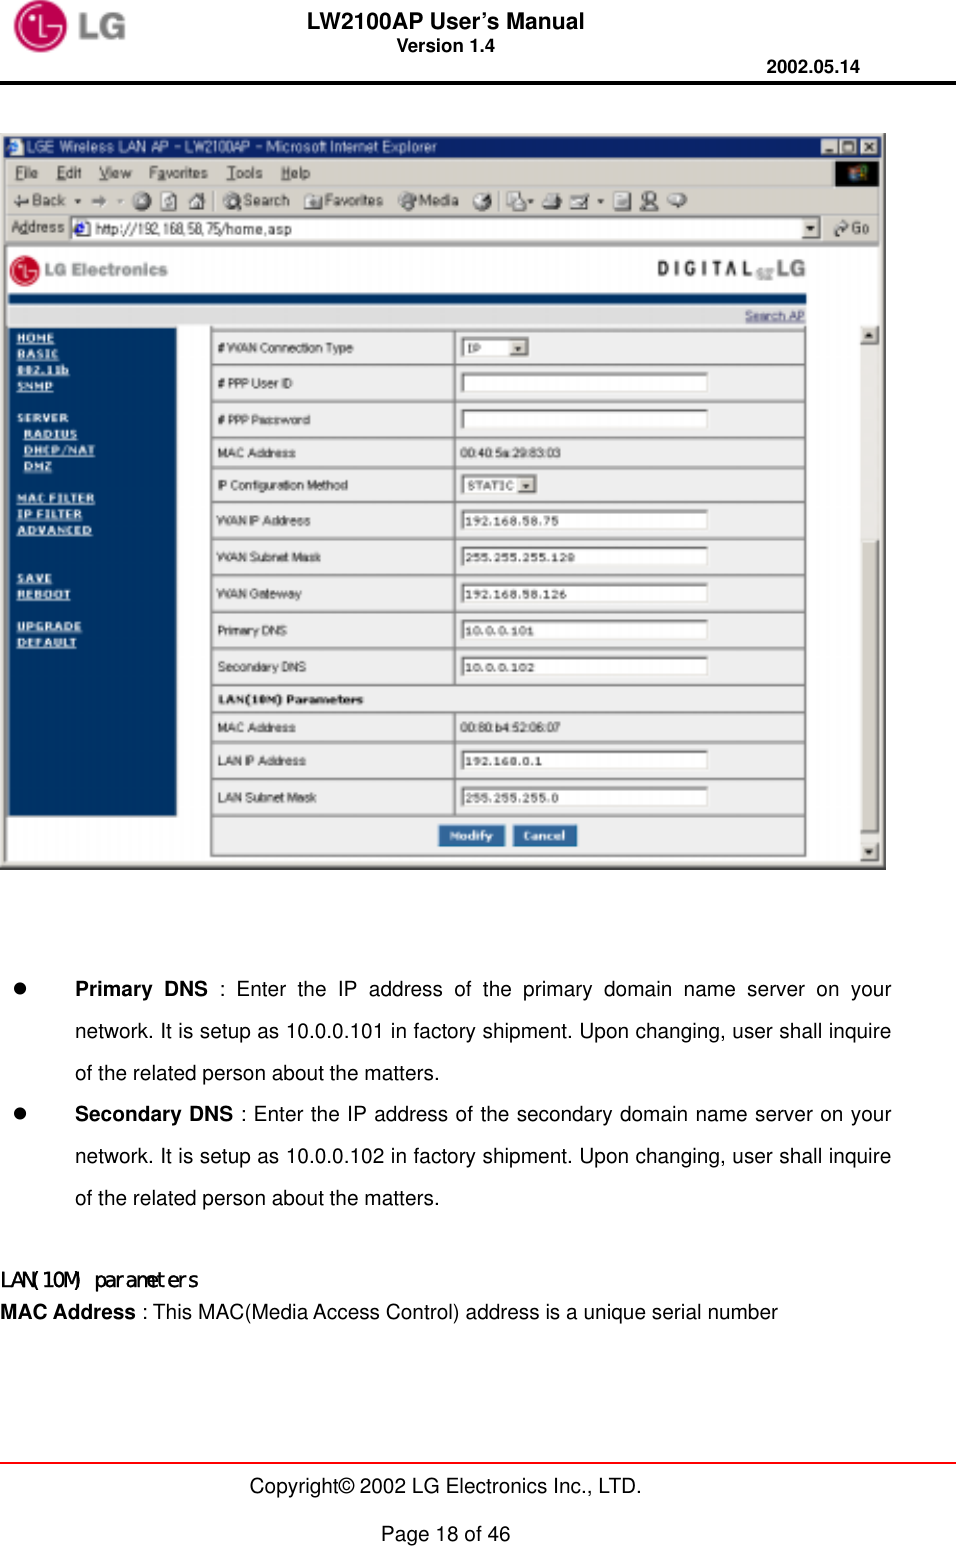 LW2100AP User’s Manual Version 1.4 2002.05.14   Copyright© 2002 LG Electronics Inc., LTD.  Page 18 of 46       Primary DNS : Enter the IP address of the primary domain name server on your network. It is setup as 10.0.0.101 in factory shipment. Upon changing, user shall inquire of the related person about the matters.   Secondary DNS : Enter the IP address of the secondary domain name server on your network. It is setup as 10.0.0.102 in factory shipment. Upon changing, user shall inquire of the related person about the matters.  LAN(10M) parameters MAC Address : This MAC(Media Access Control) address is a unique serial number 